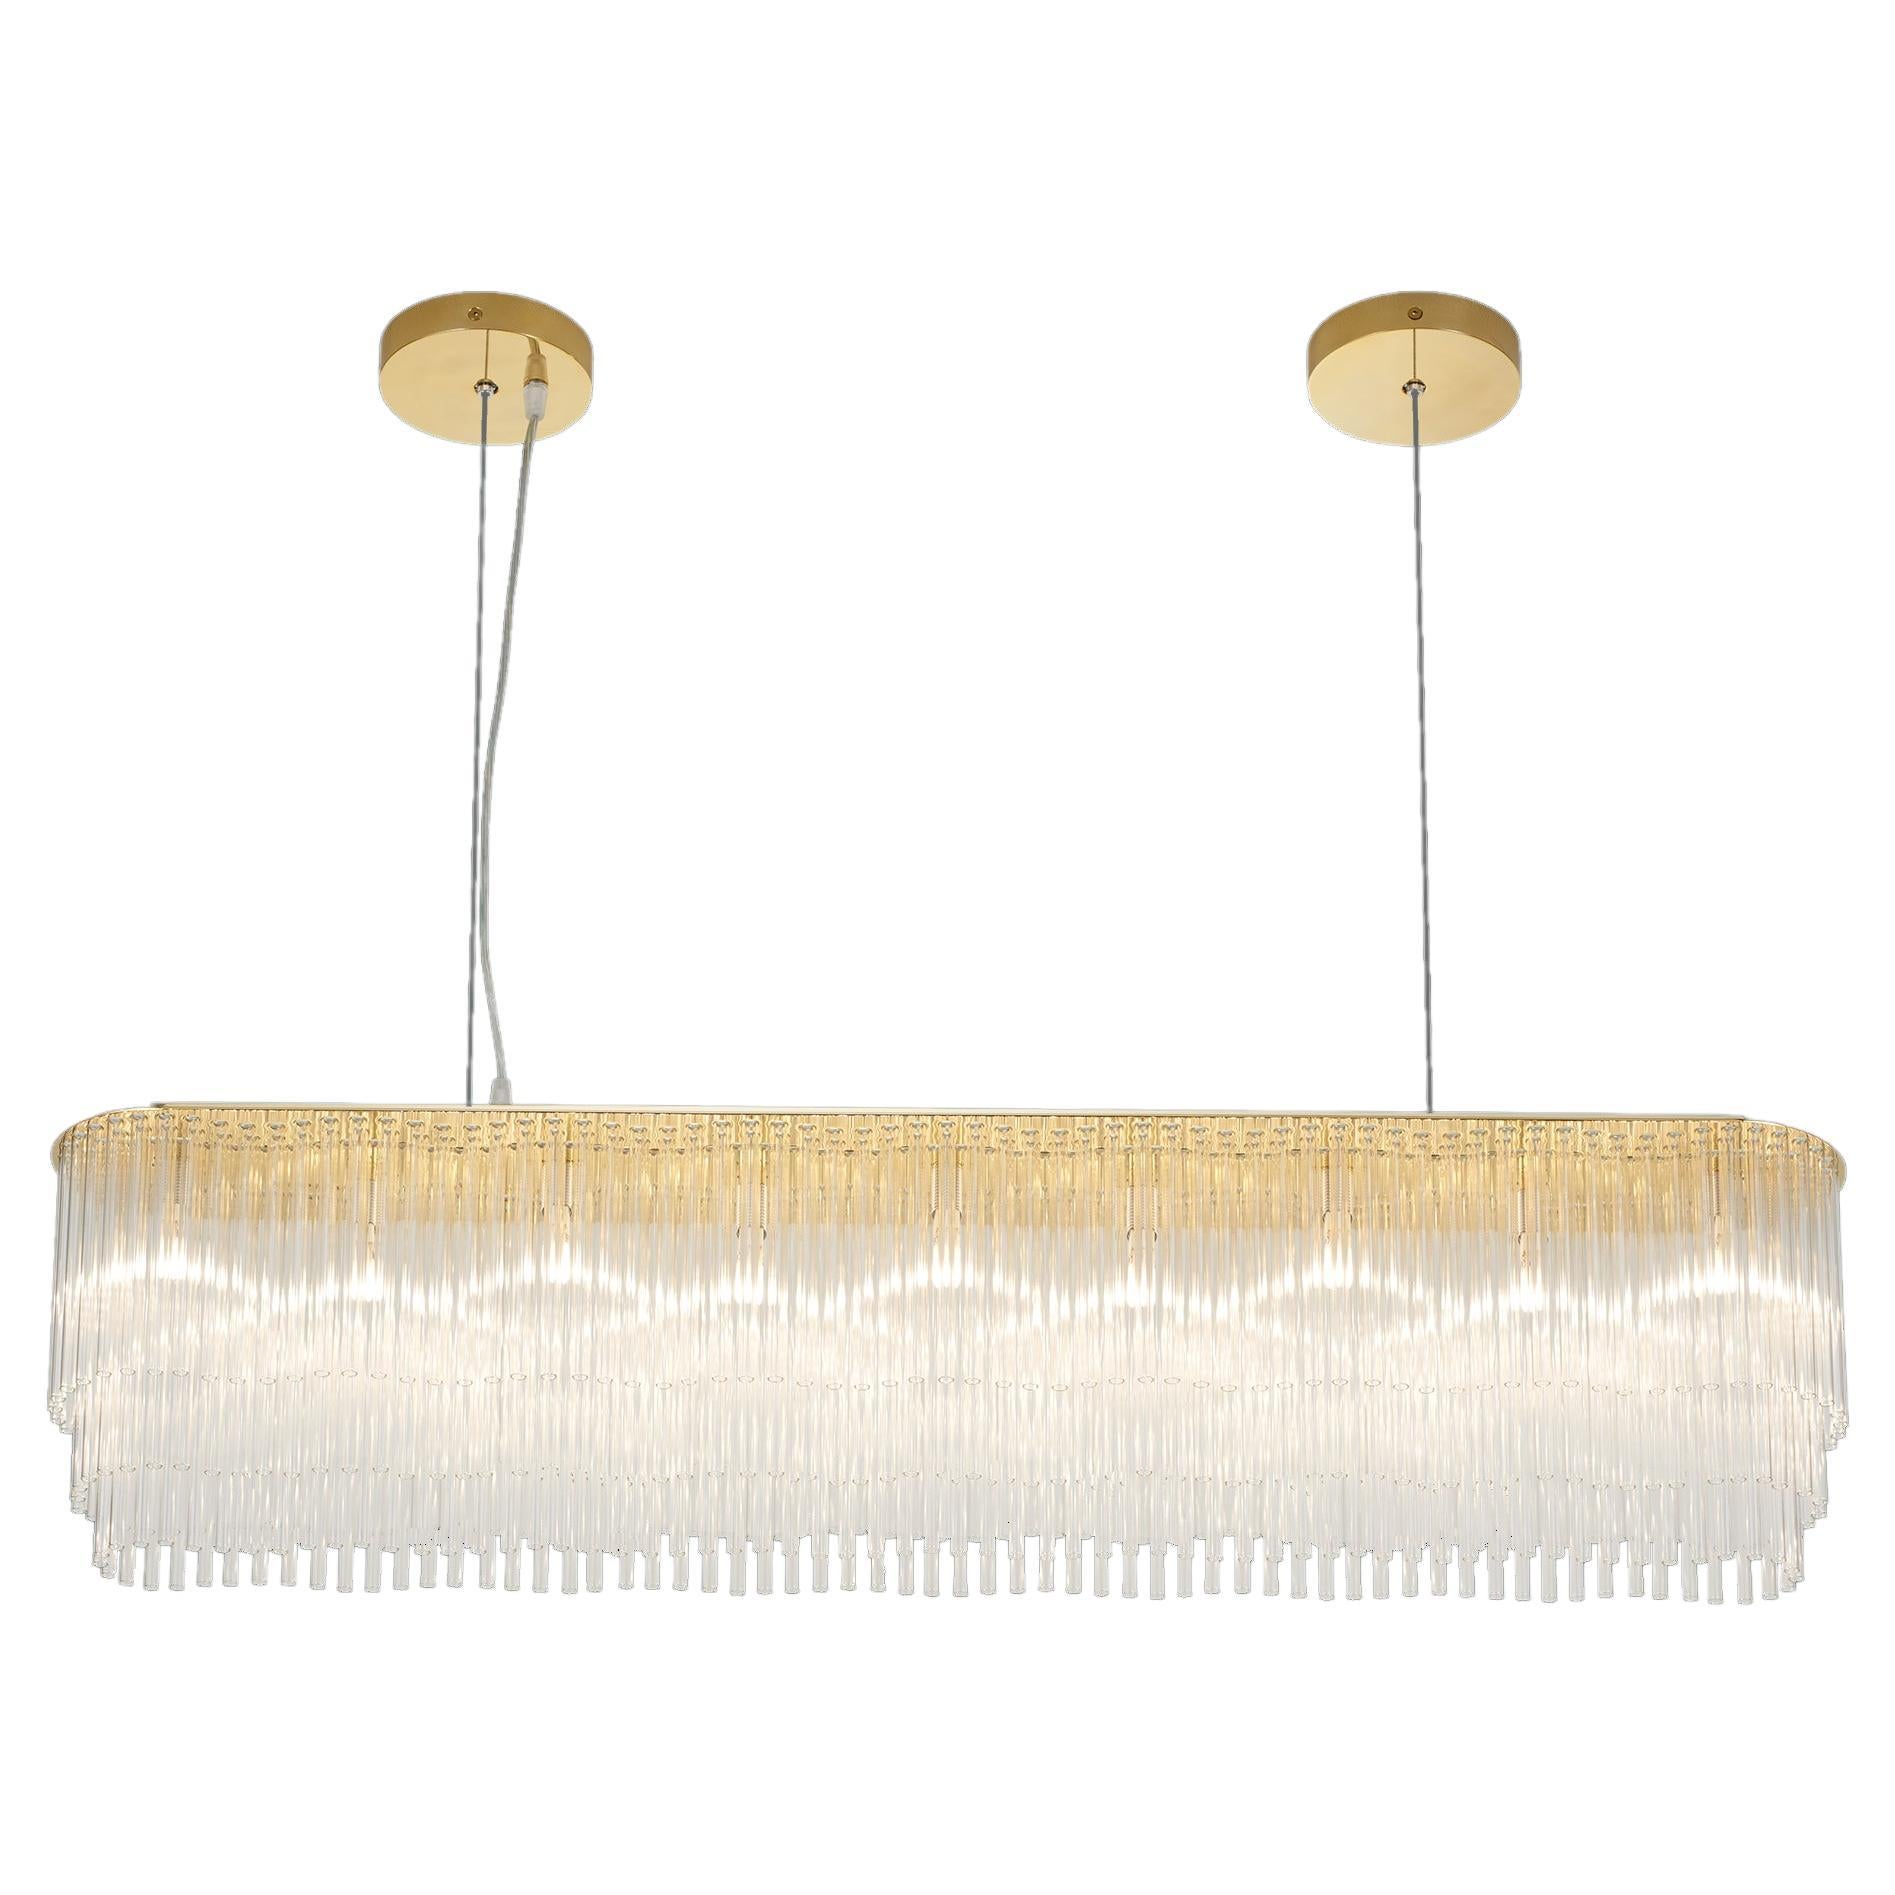 Linear Chandelier Thin 1010mm/39.75" in Polished Brass / Tiered Glass Profile For Sale